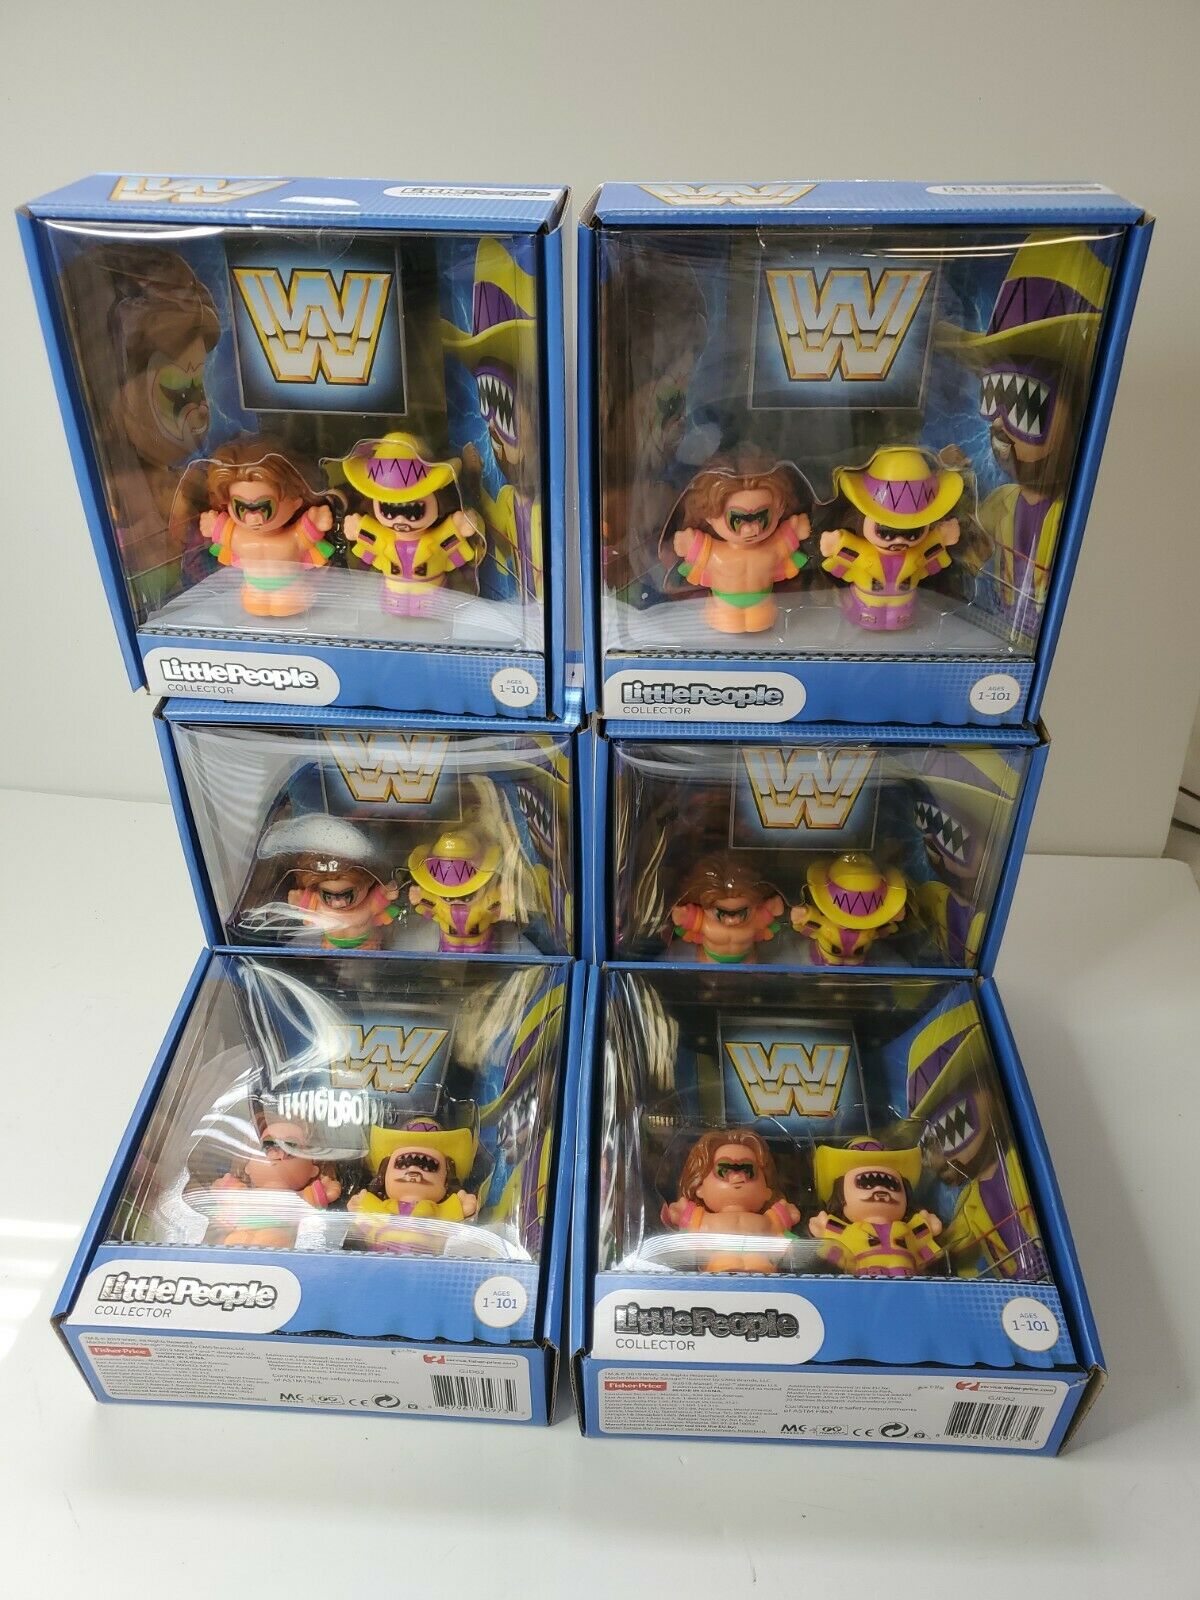 Wwe Ultimate Warrior And Macho Man Randy Savage Figures Little People Lot Of 6